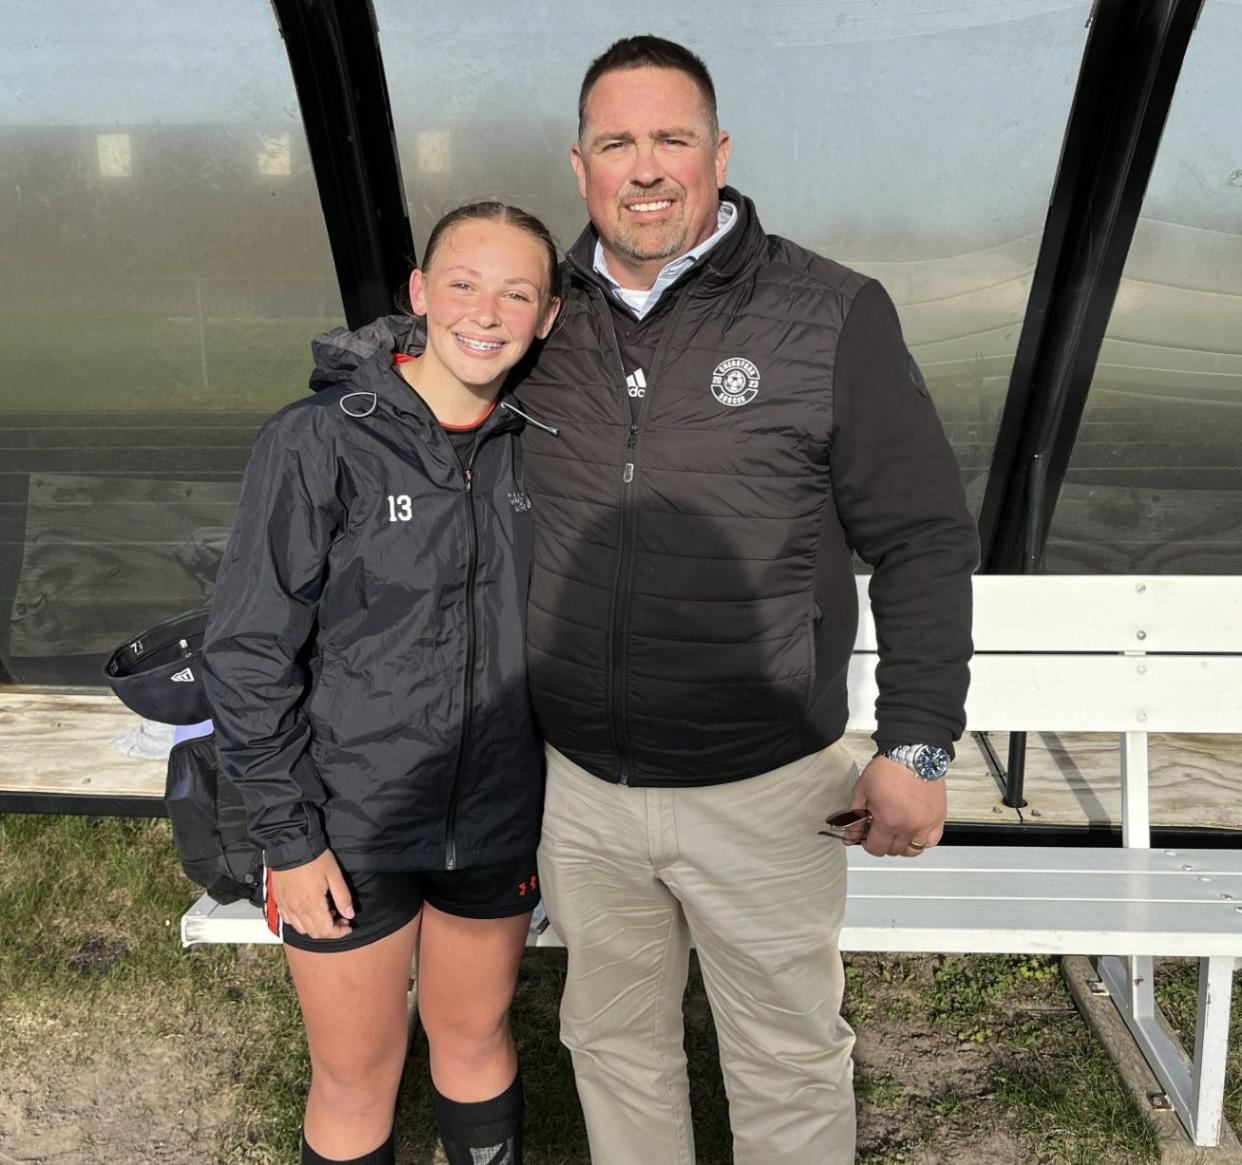 For Cheboygan girls soccer coach Tom Markham, he gets a joy out of coaching his youngest daughter, midfielder Elise Markham, who has already made a huge impact for his team on the pitch.